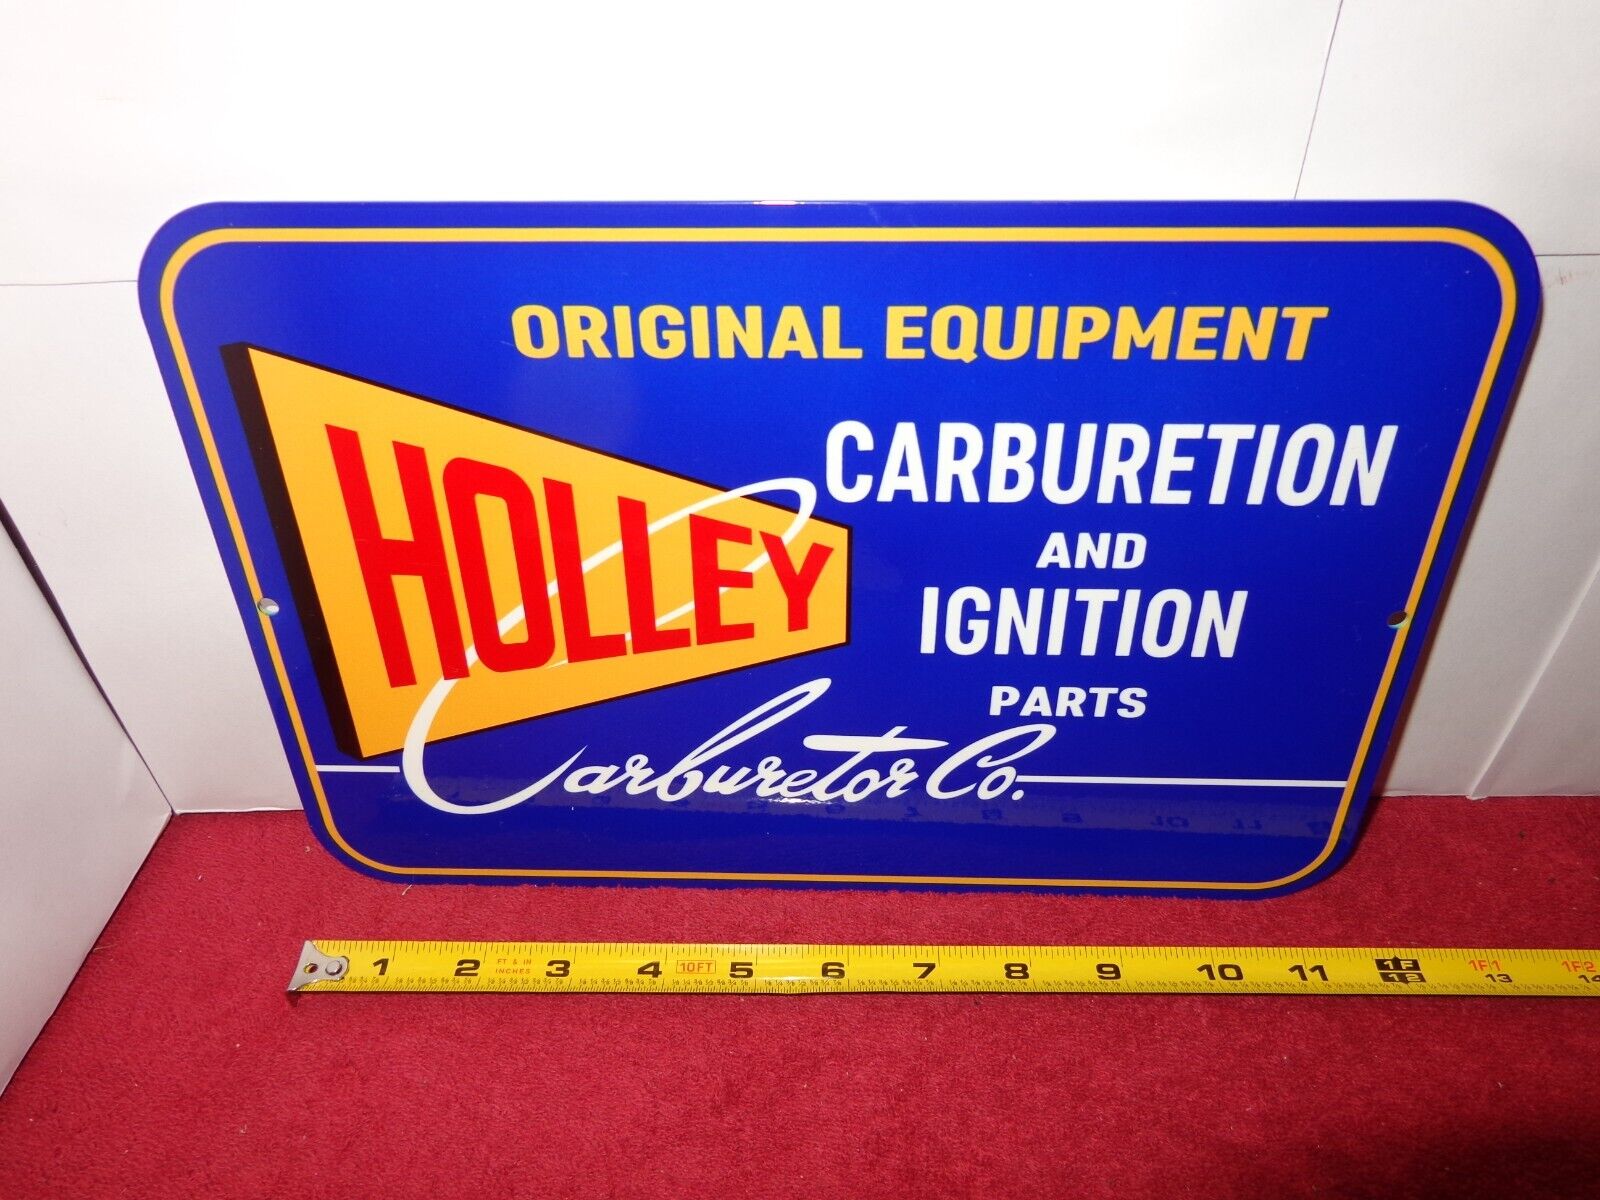 12 x 8 in HOLLEY CARBURETION & IGNITION PARTS ADV. SIGN DIE CUT METAL  # 939 C